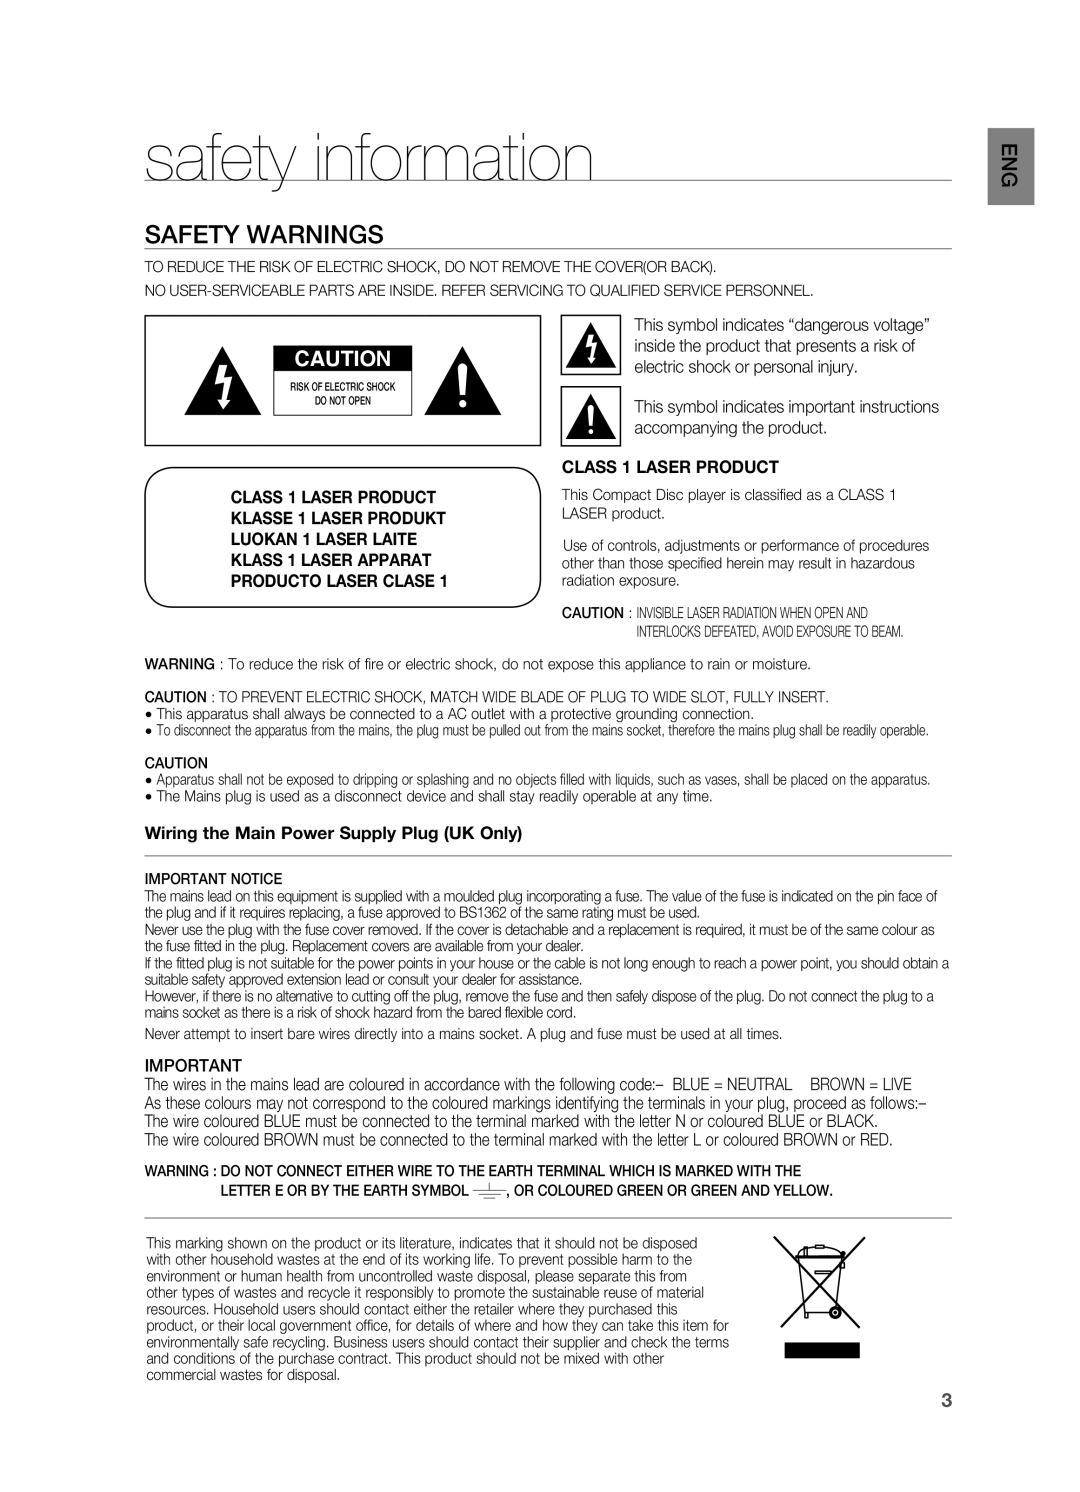 Samsung HT-X710 safety information, Safety Warnings, CLASS 1 LASER PRODUCT, Wiring the Main Power Supply Plug UK Only 